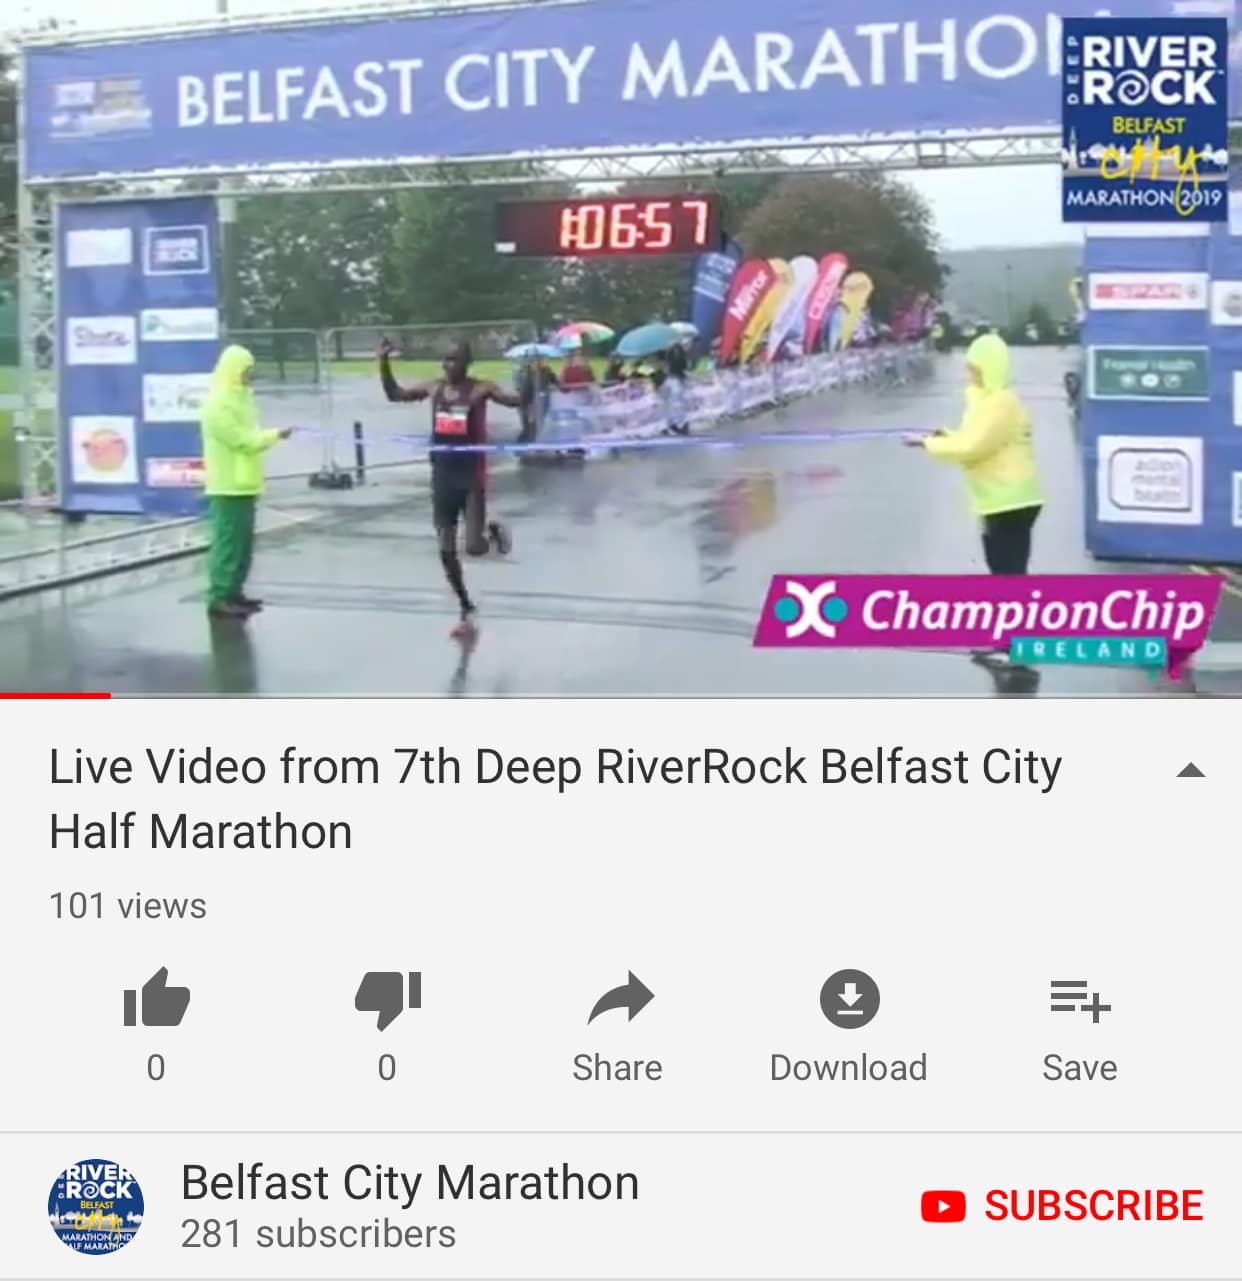 Facebook Live Finish Area Video available on YouTube